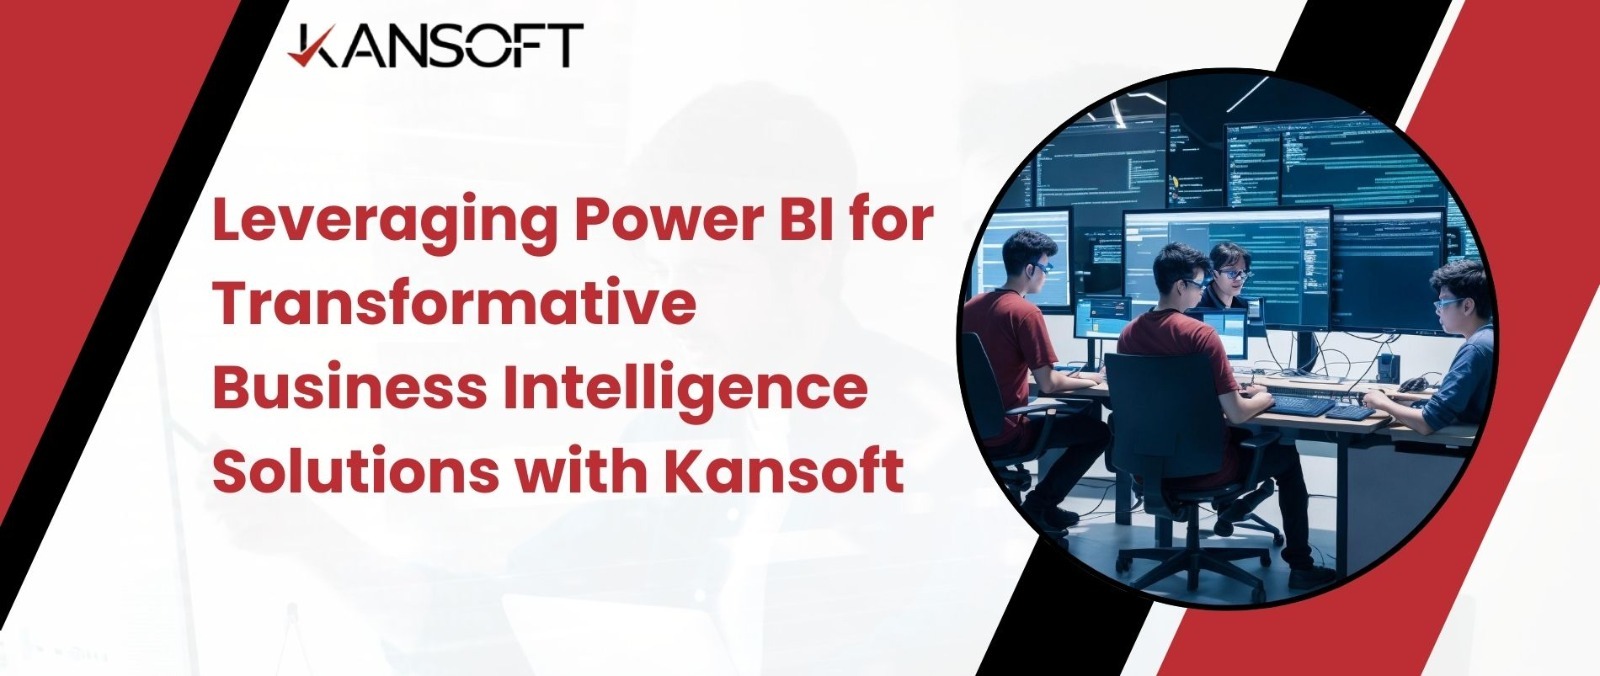 Leveraging Power BI for Transformative Business Intelligence Solutions with Kansoft